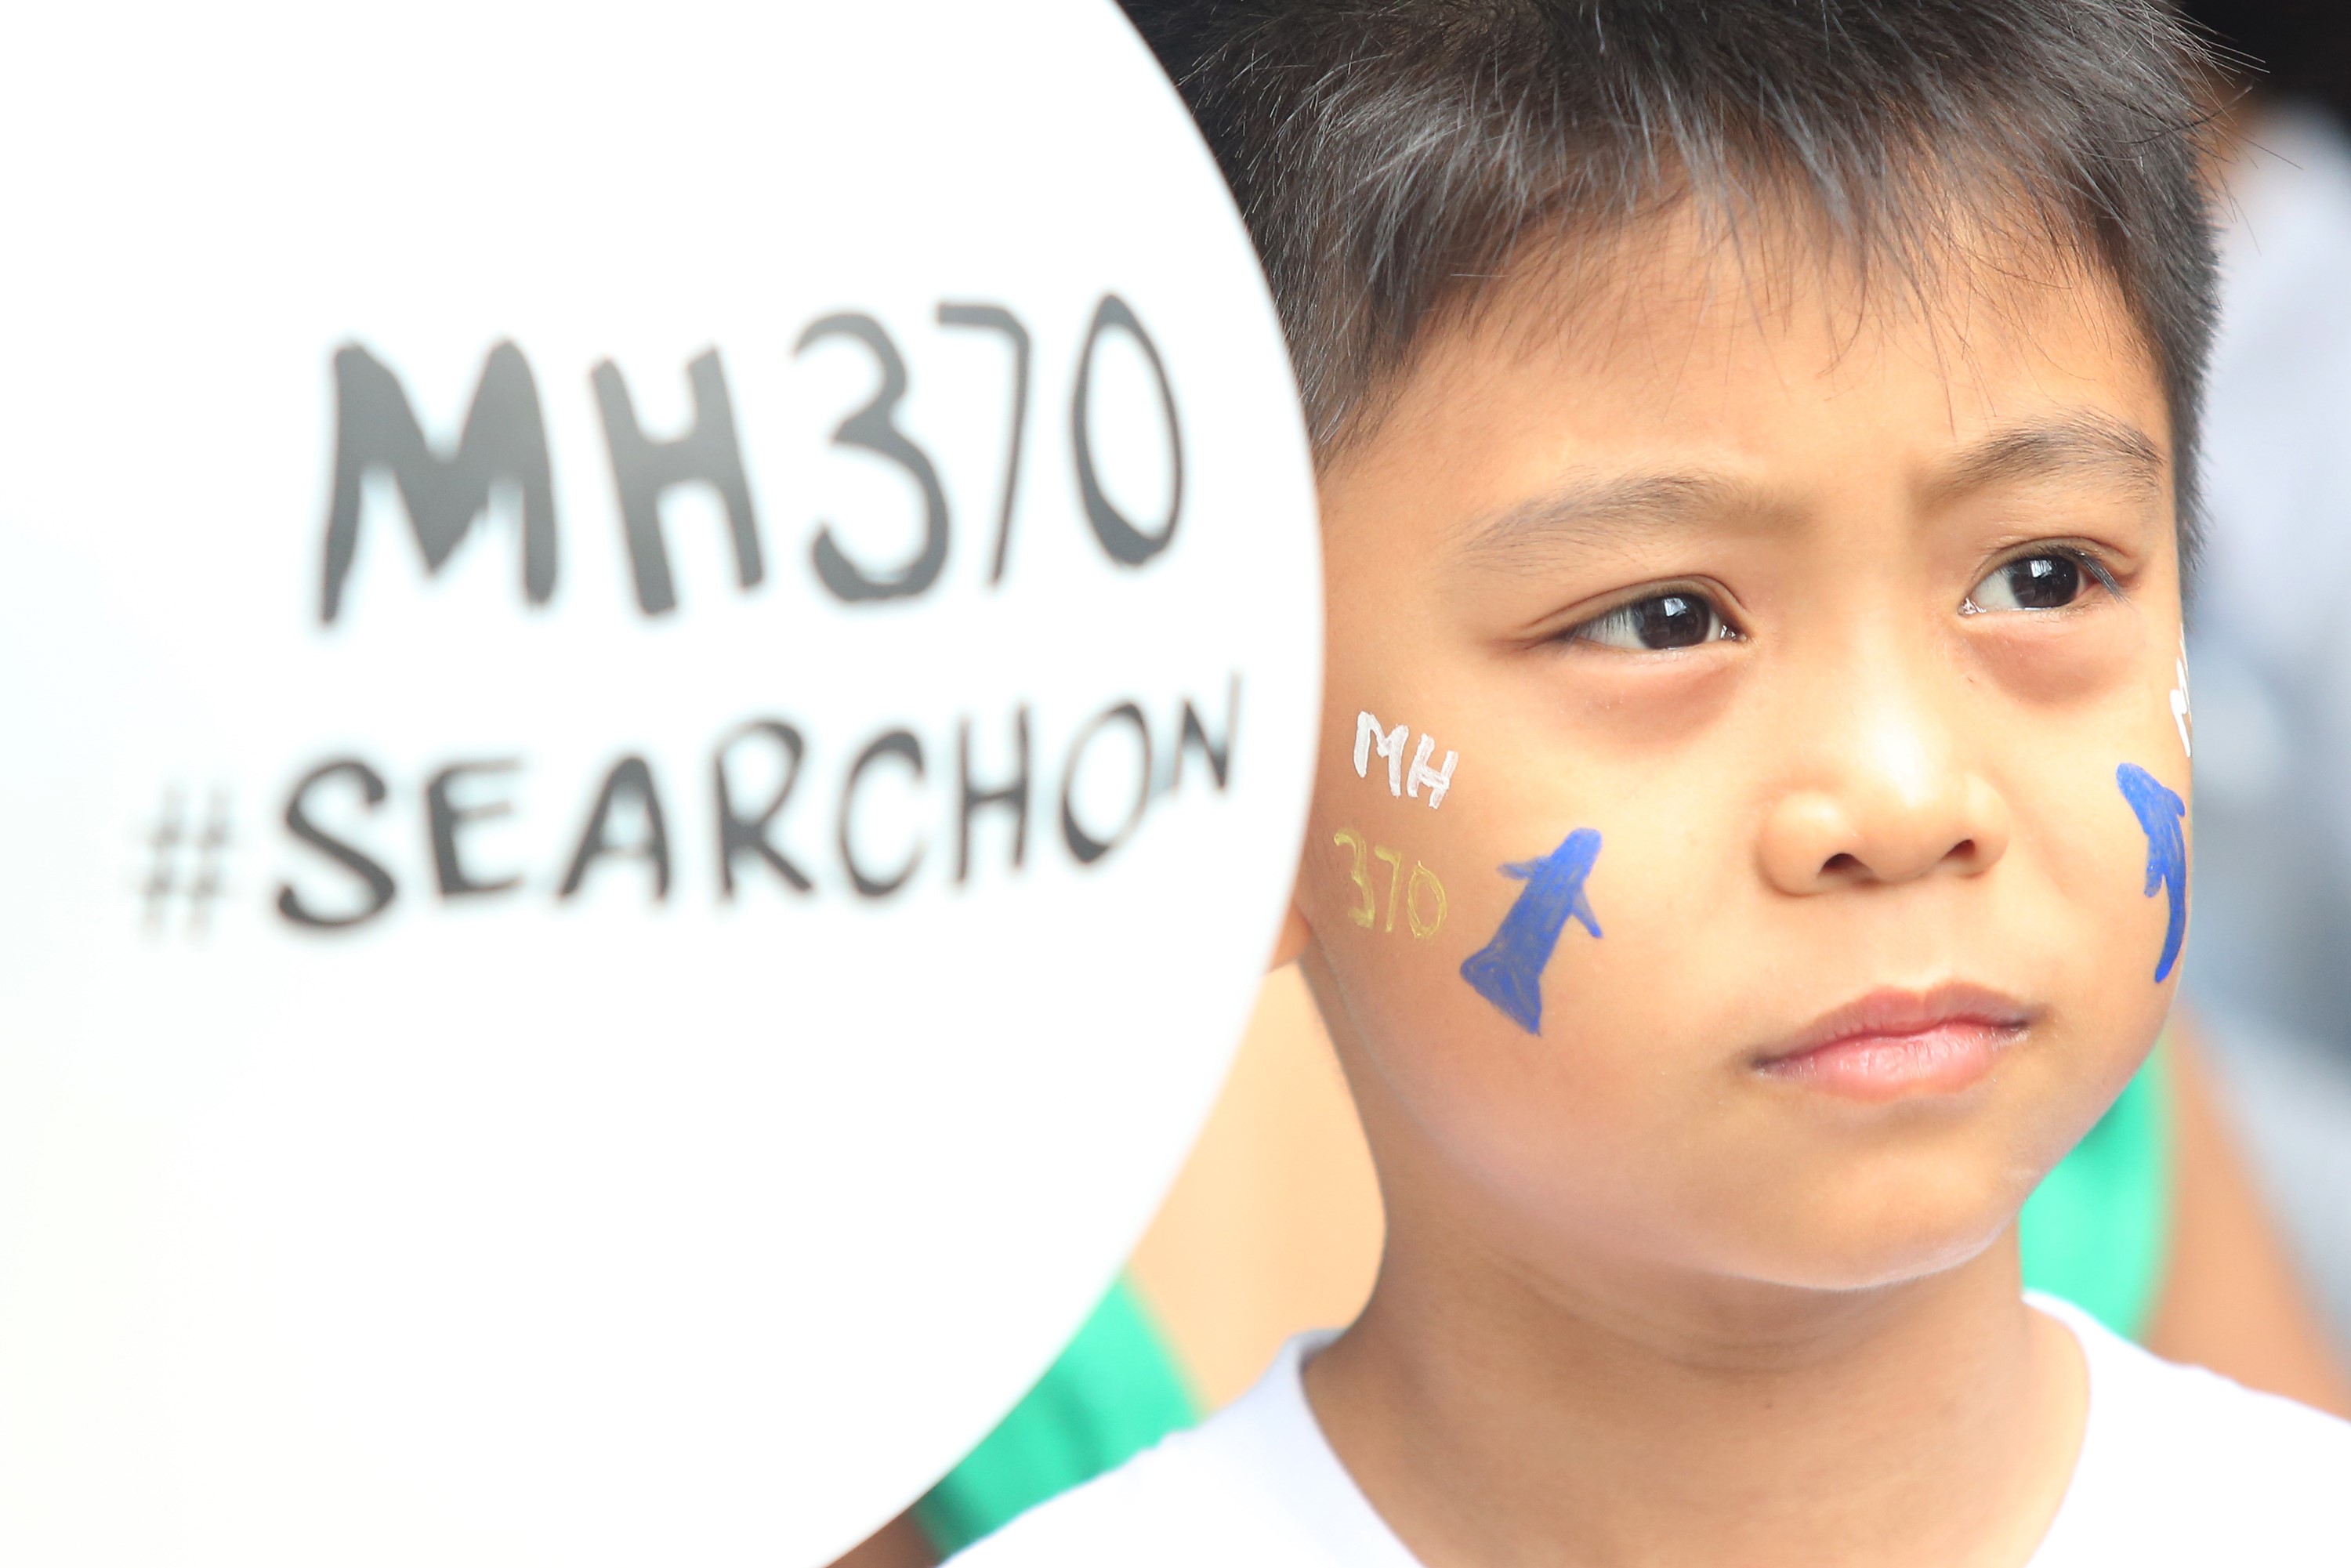 Flight MH370: New Search for Missing Malaysian Airlines Plane Begins ...